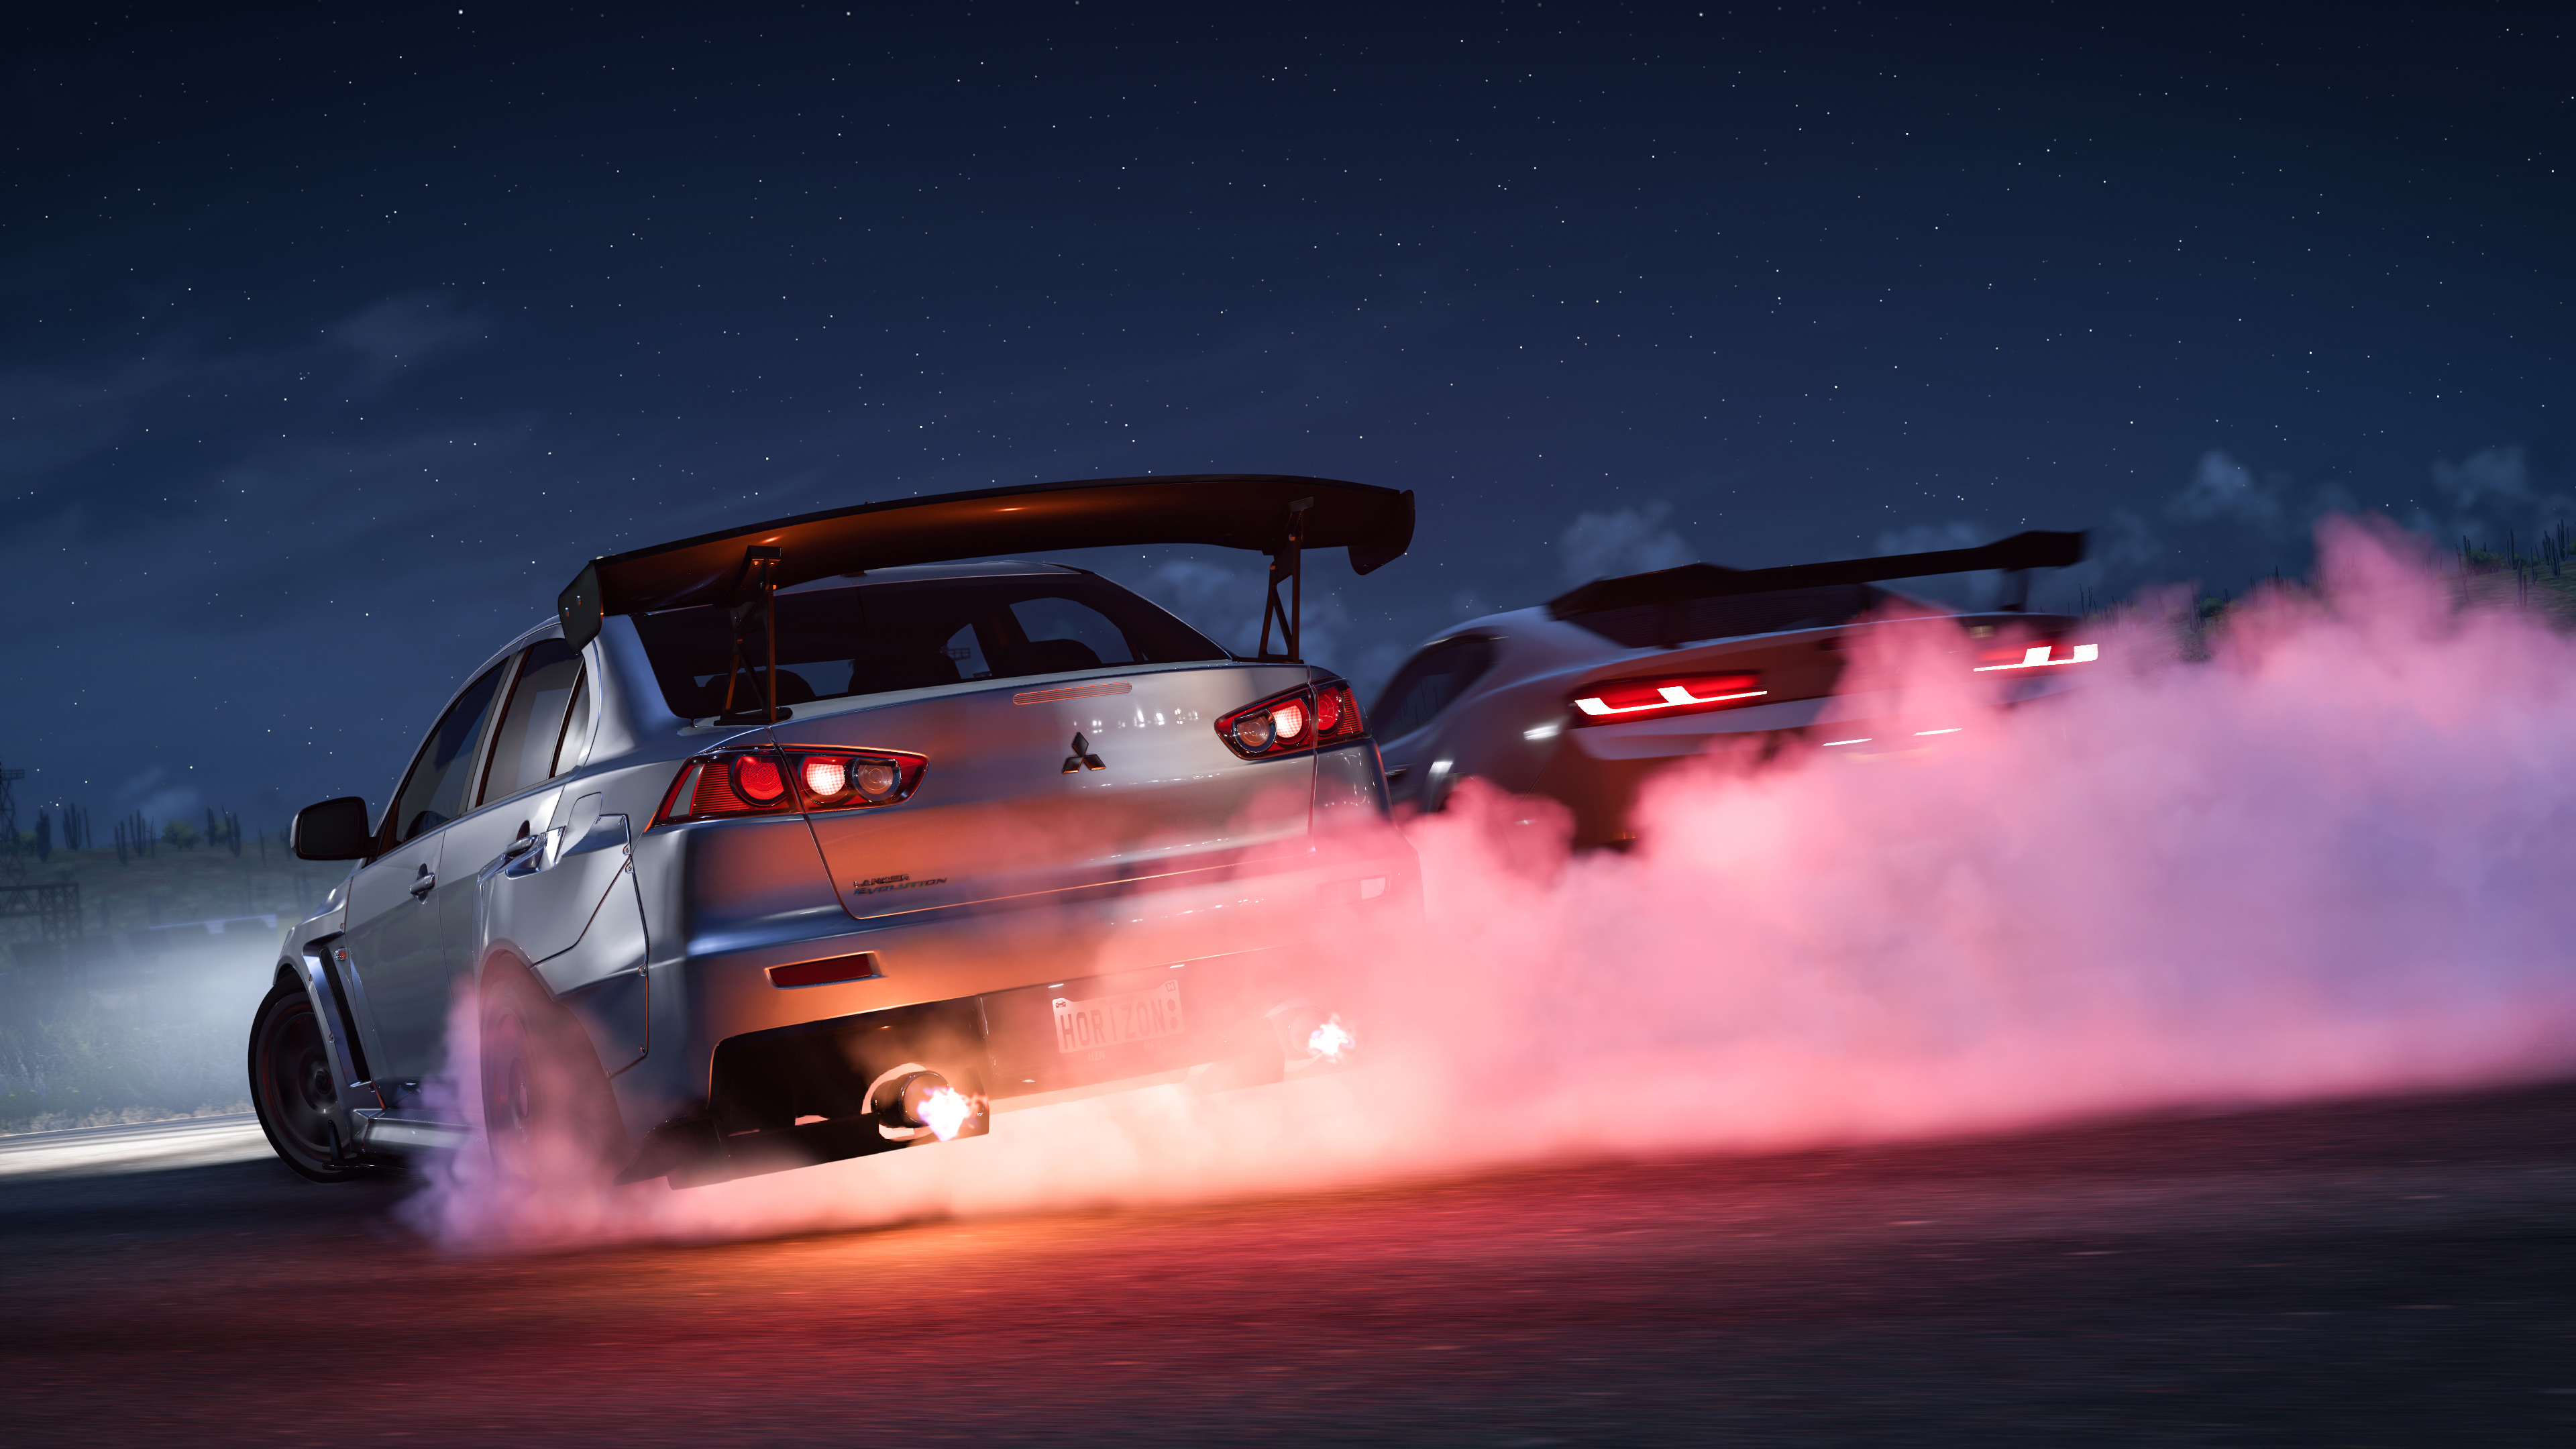 Forza Horizon 5 Wallpapers  Top 35 Best Forza Horizon 5 Backgrounds Images